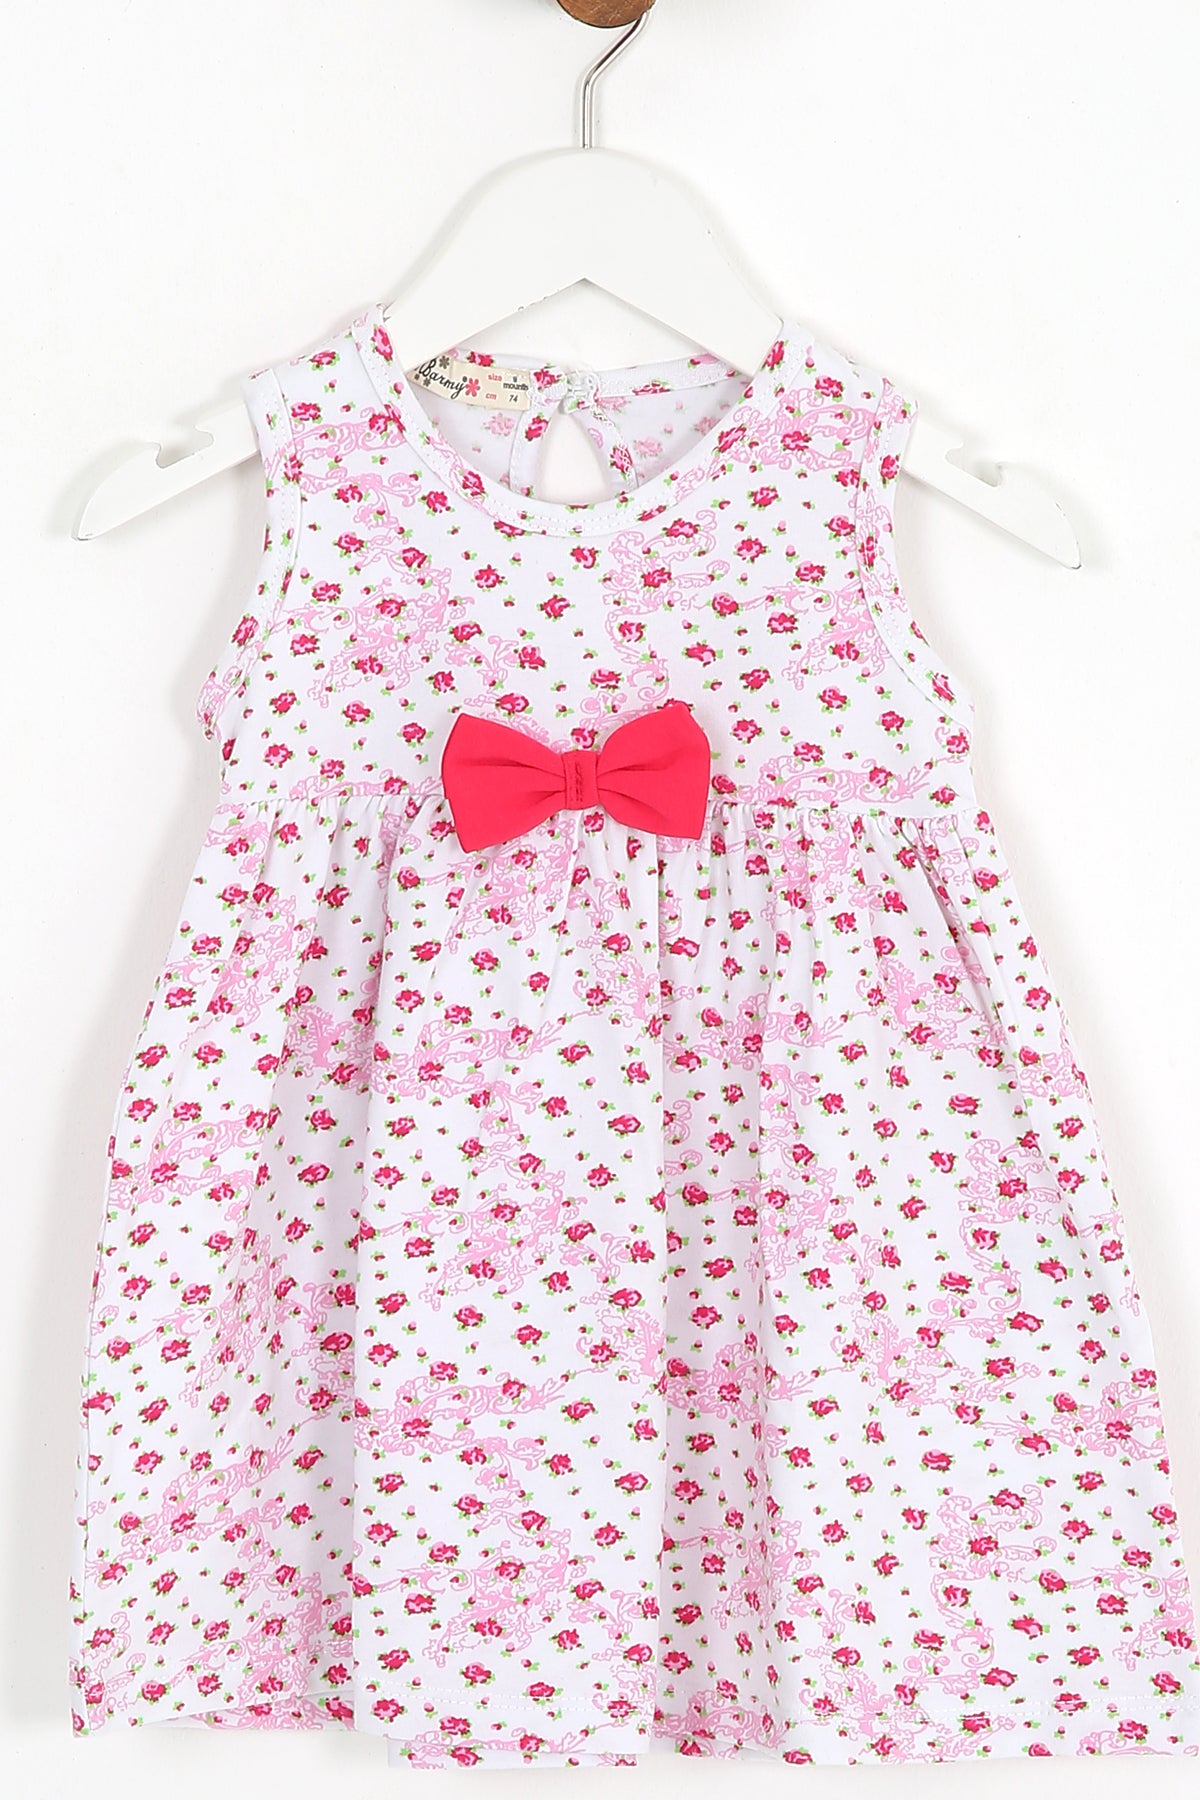 Girl's sleeveless dress with floral design